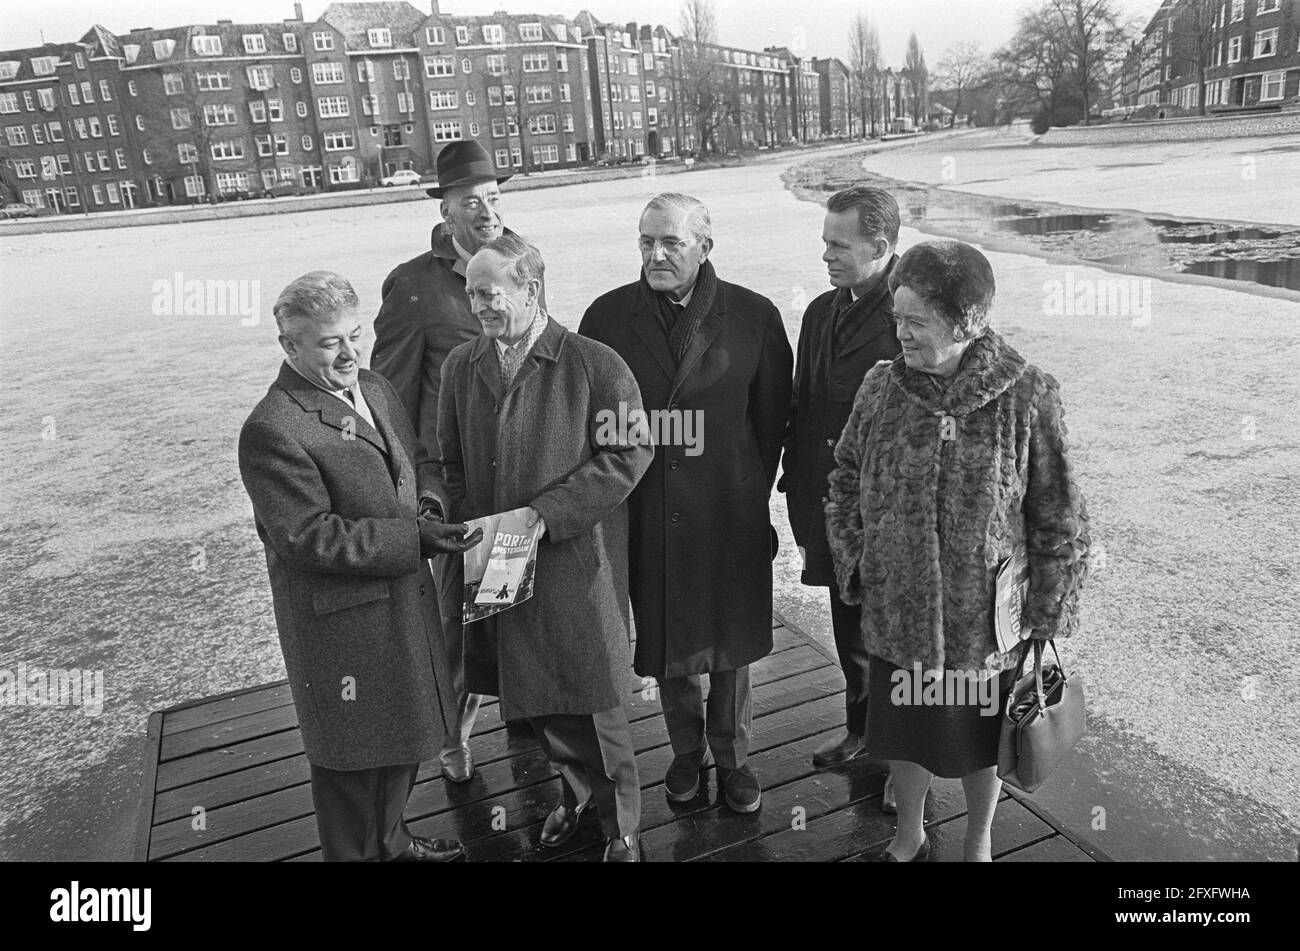 From left to right architect Prof. H. Schader, architect Huig Maaskant, city architect Chris Nielsen, J. Pedersen (Copenhagen city architect), architect Frans van Gool and urban planner Ms. Jacoba (Ko) Mulder, January 13, 1968, architects, juries, urban planners, The Netherlands, 20th century press agency photo, news to remember, documentary, historic photography 1945-1990, visual stories, human history of the Twentieth Century, capturing moments in time Stock Photo